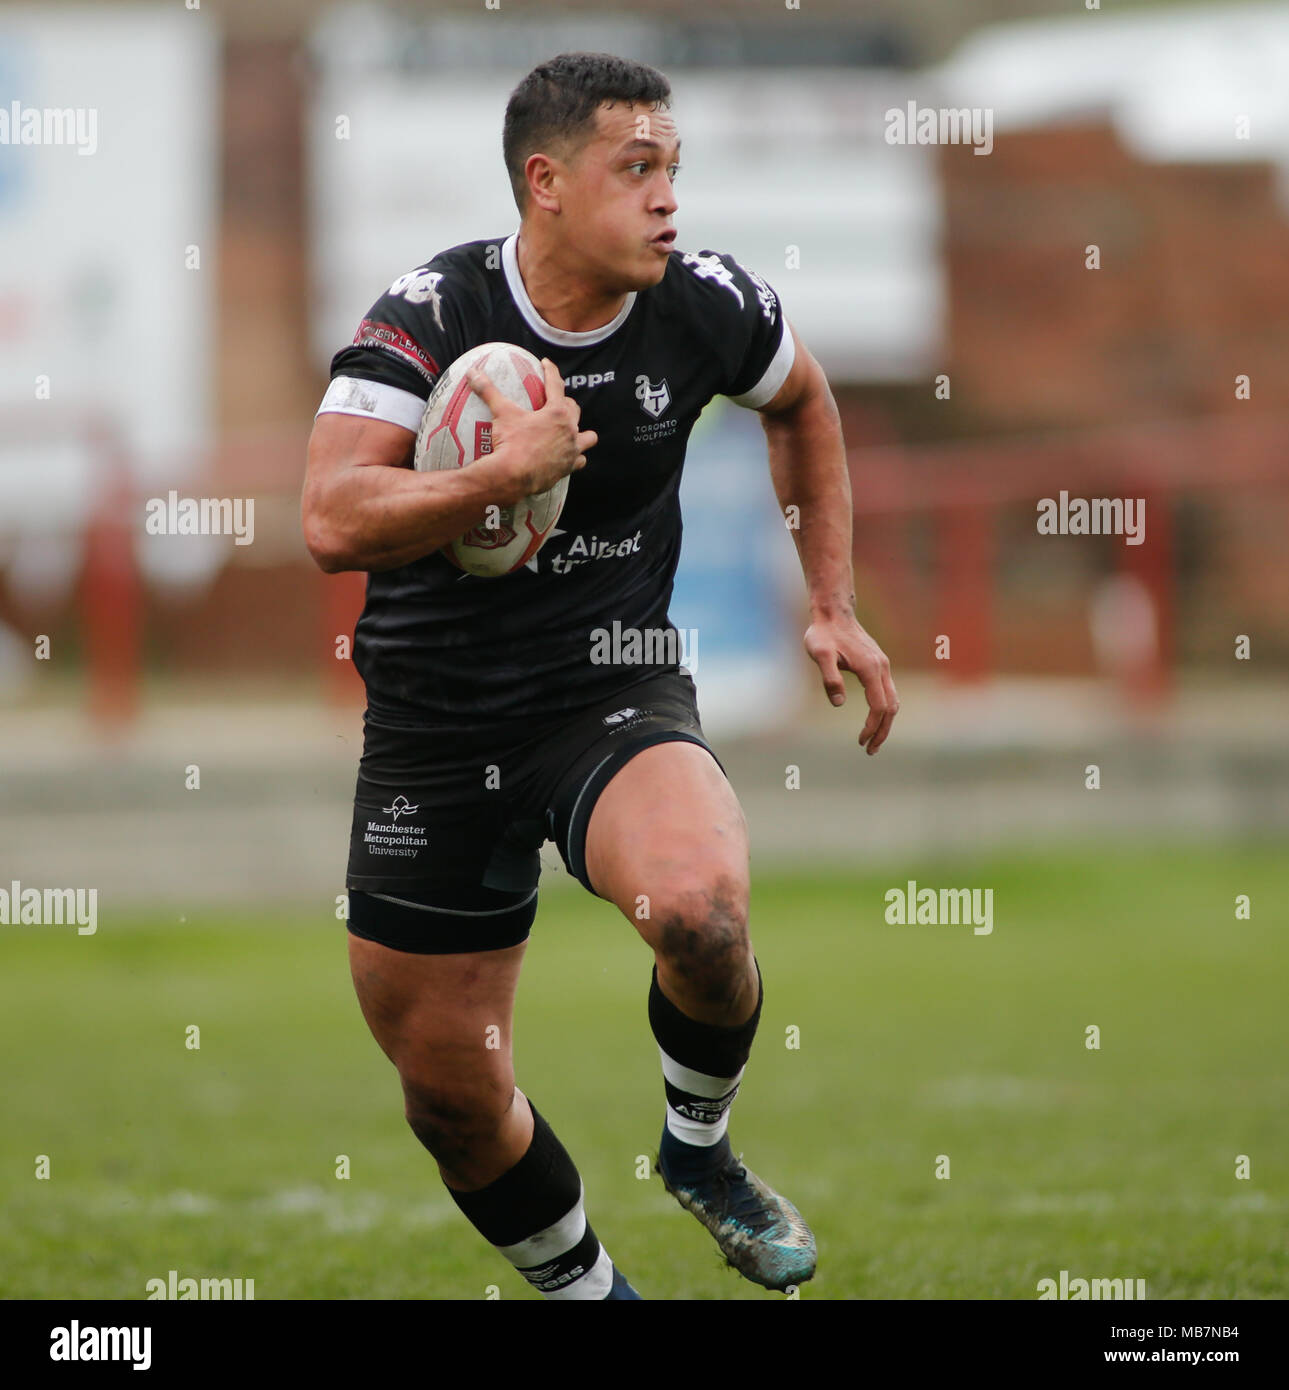 Fox's Biscuit Stadium, Batley, West Yorkshire, 7 April 2018.   Betfred Rugby League Championship : Batley Bulldogs vs Toronto Wolfpack  Chase Stanley of Toronto Wolfpack  Credit: Touchlinepics/Alamy Live News Stock Photo